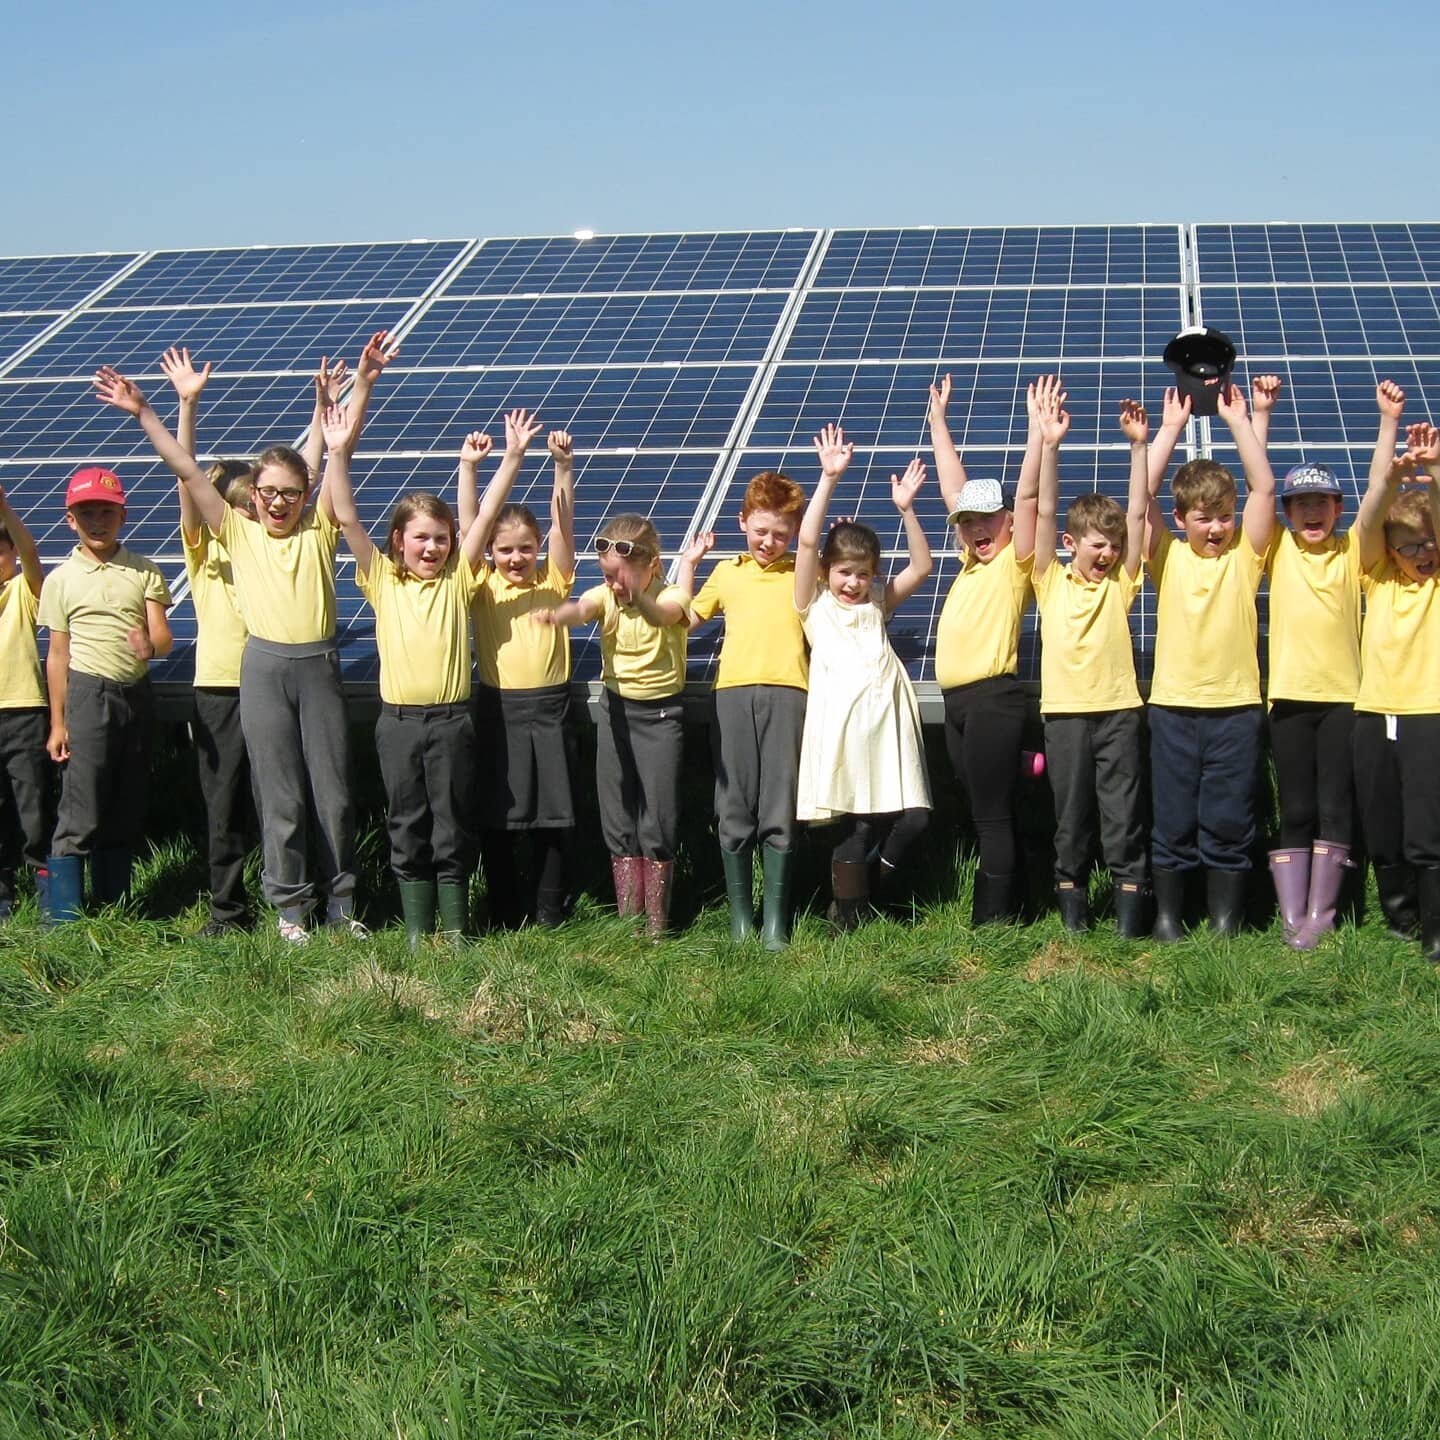 Welcome to our new Instagram account! 😀 
We would normally be out an about on solar and wind farms across the UK educating schools and Universities. 
Our 'new normal' is supporting learning remotely. Next week we will be looking at #nationalinsectwe